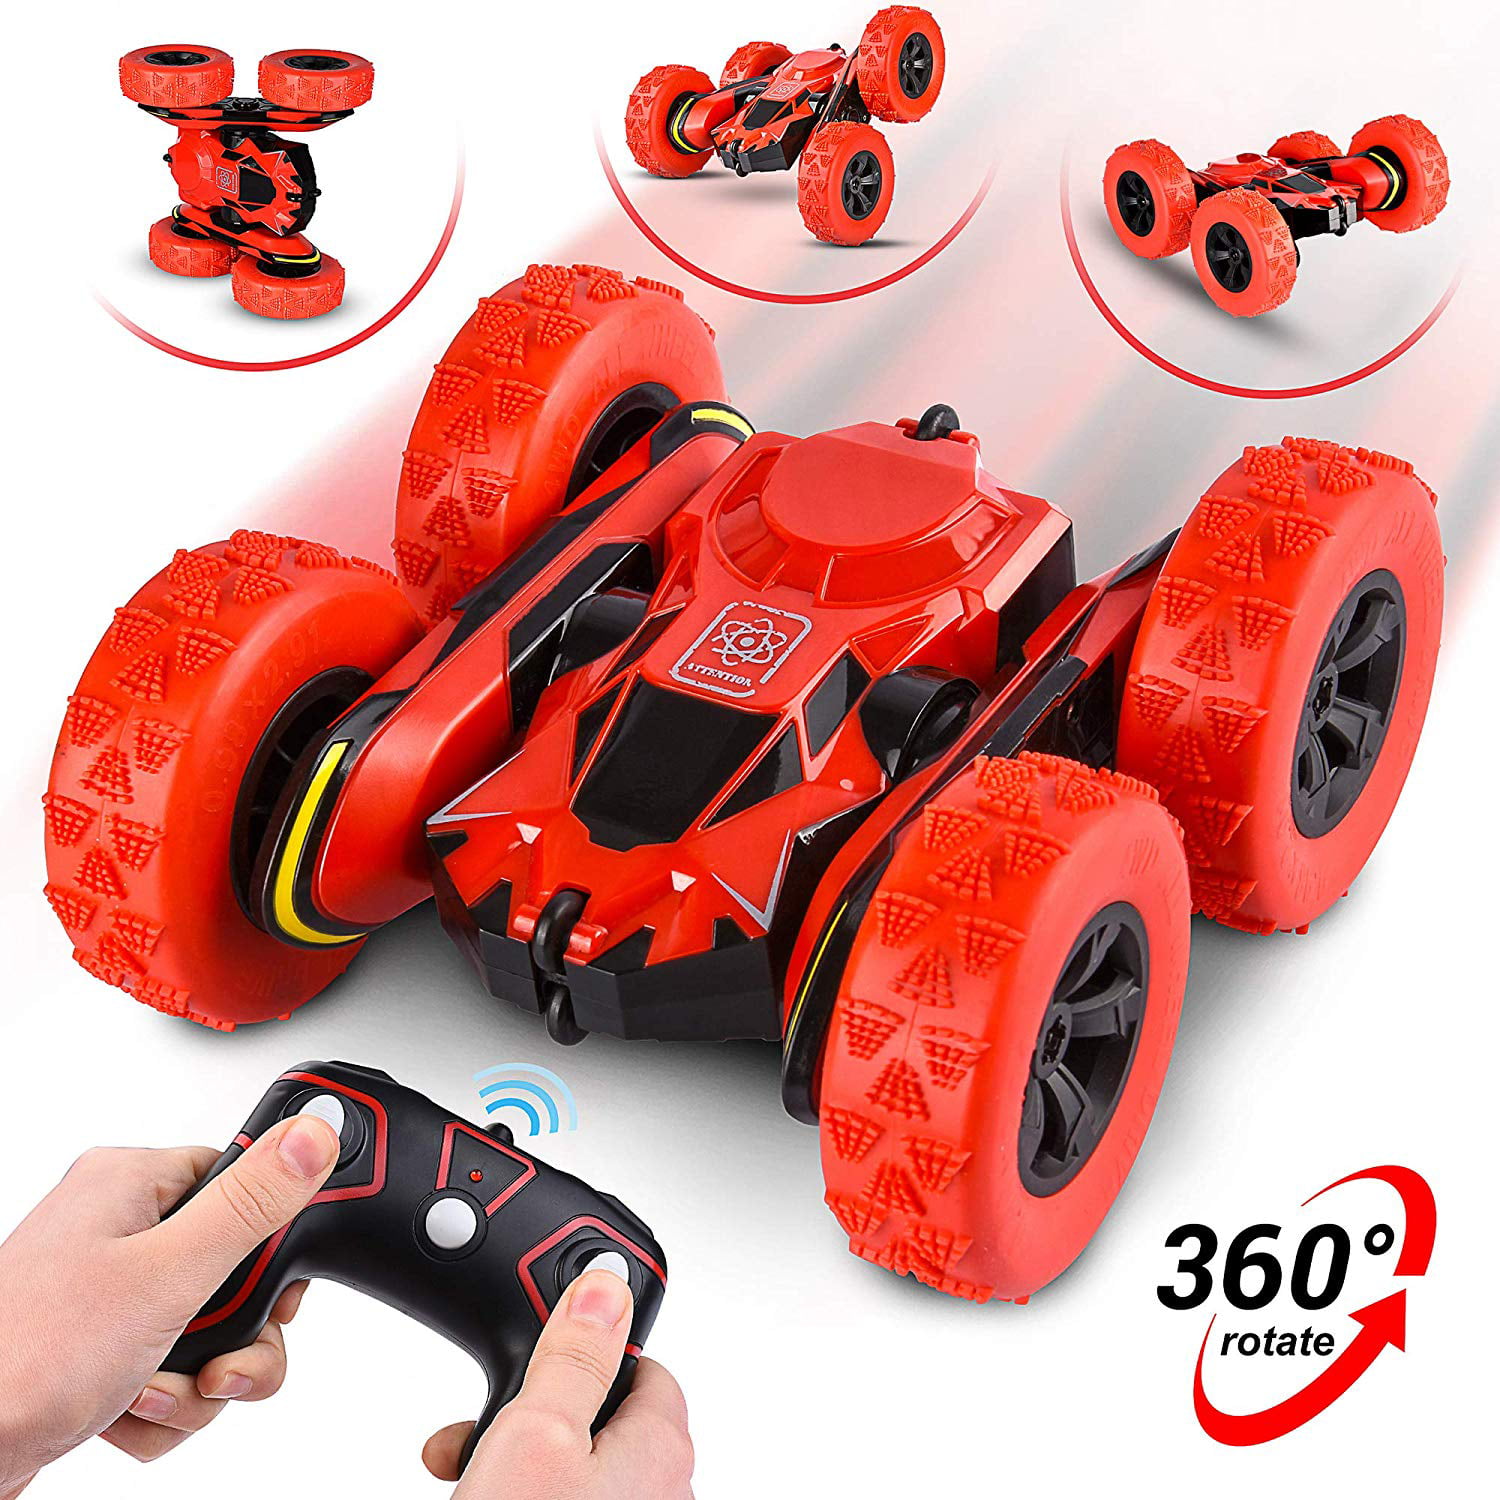 Details about  / RC Stunt Car 2.4G RC Toy 360° Rotation RC Off-road Racing Car Birthday 360 Degre